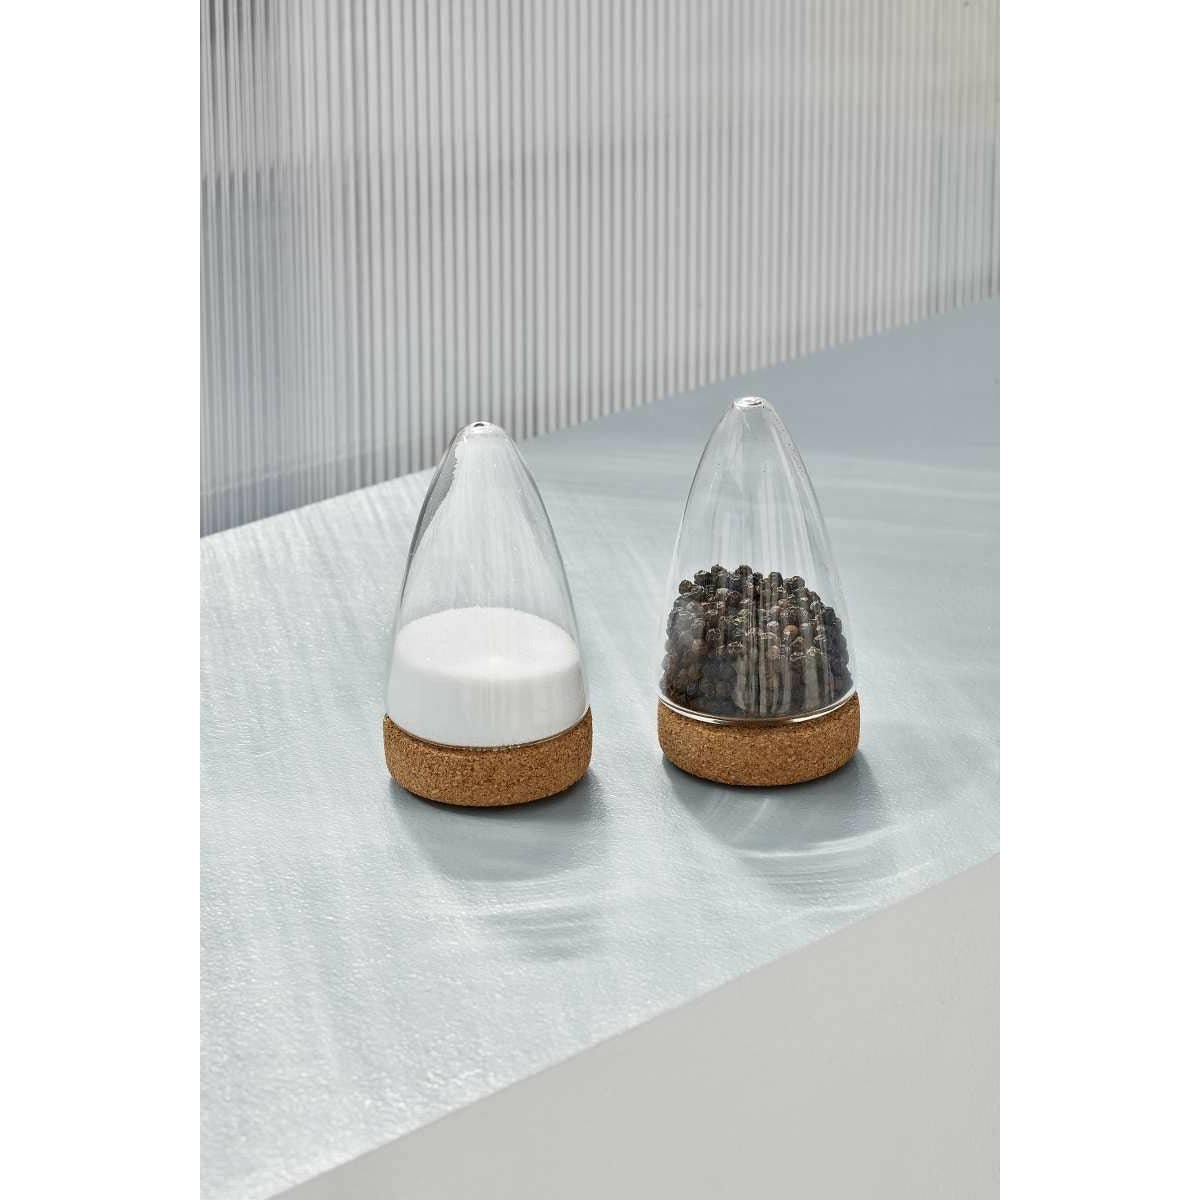 Two Puik Boeien salt and pepper shakers on a table.